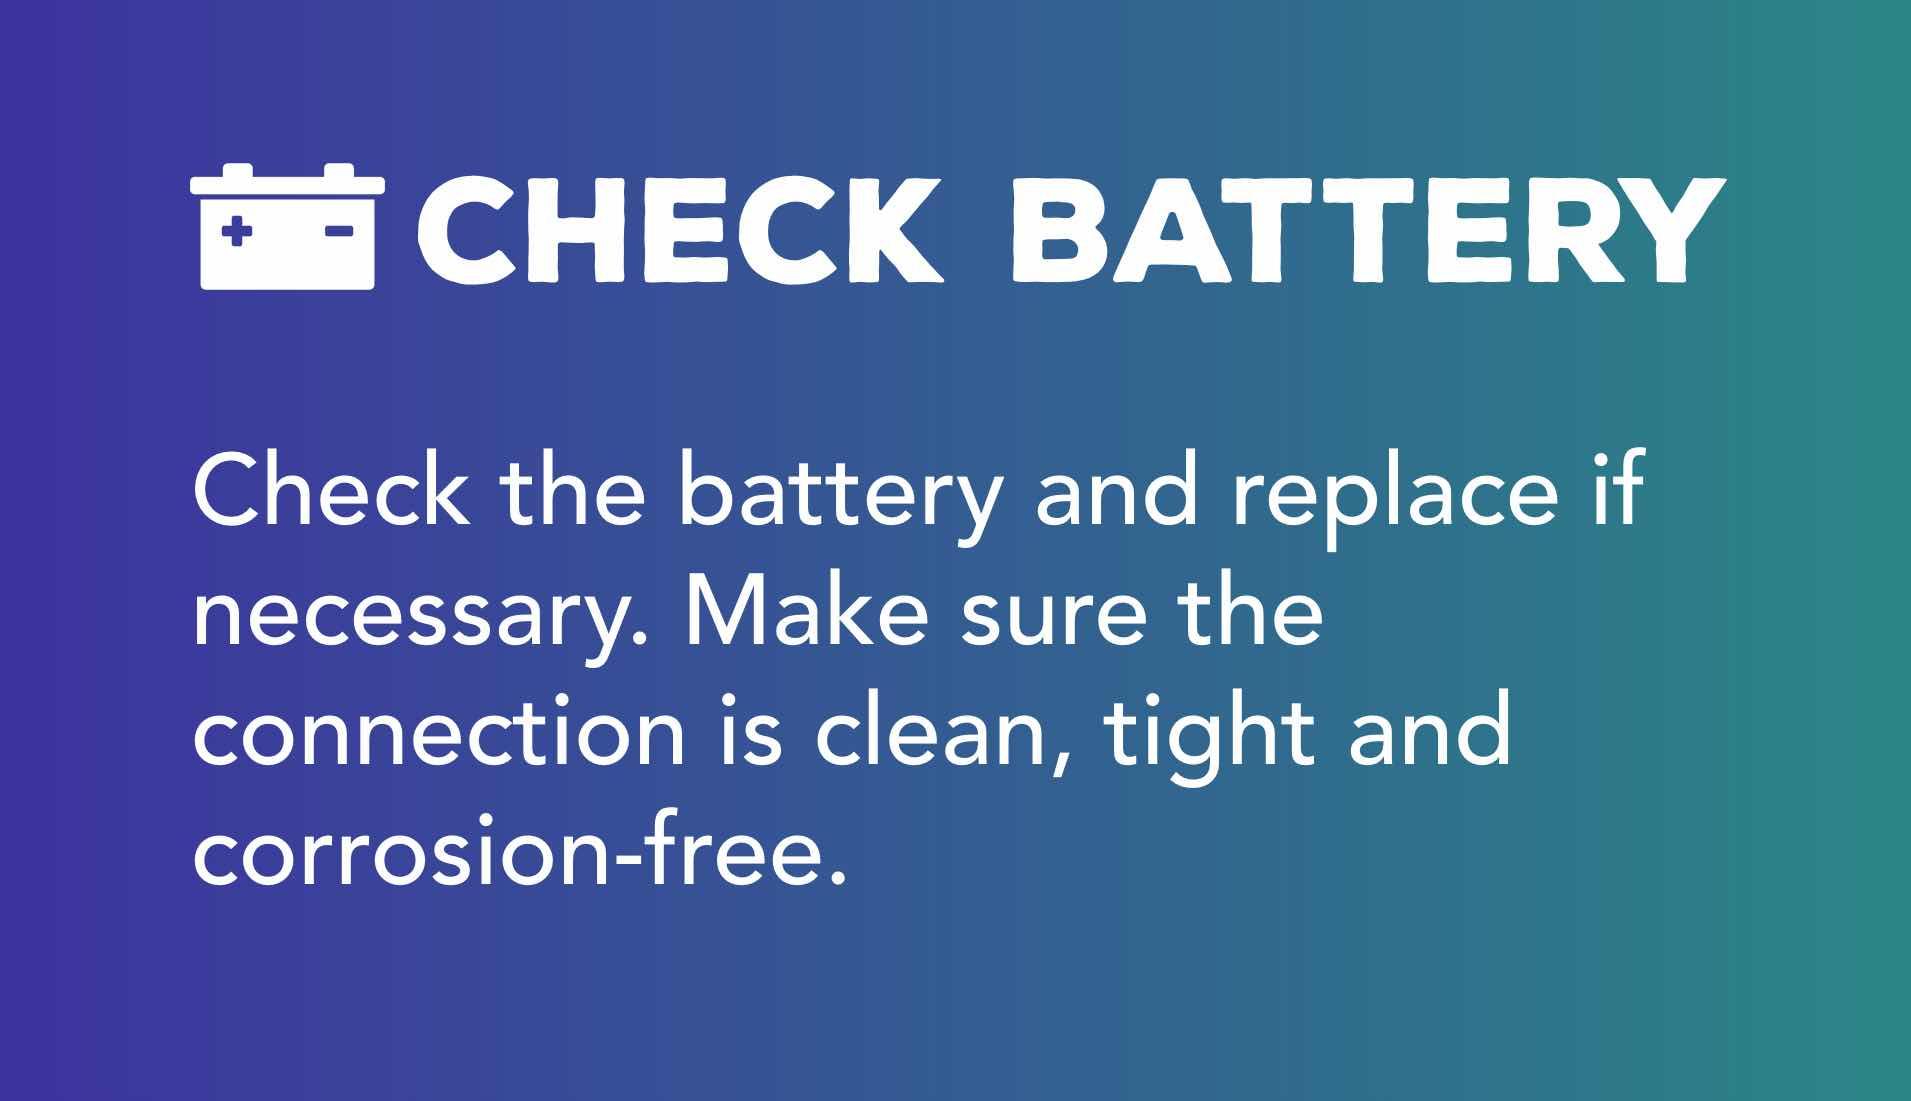 Check the battery and replace if necessary. Make sure the connection is clean, tight and corrosion-free.